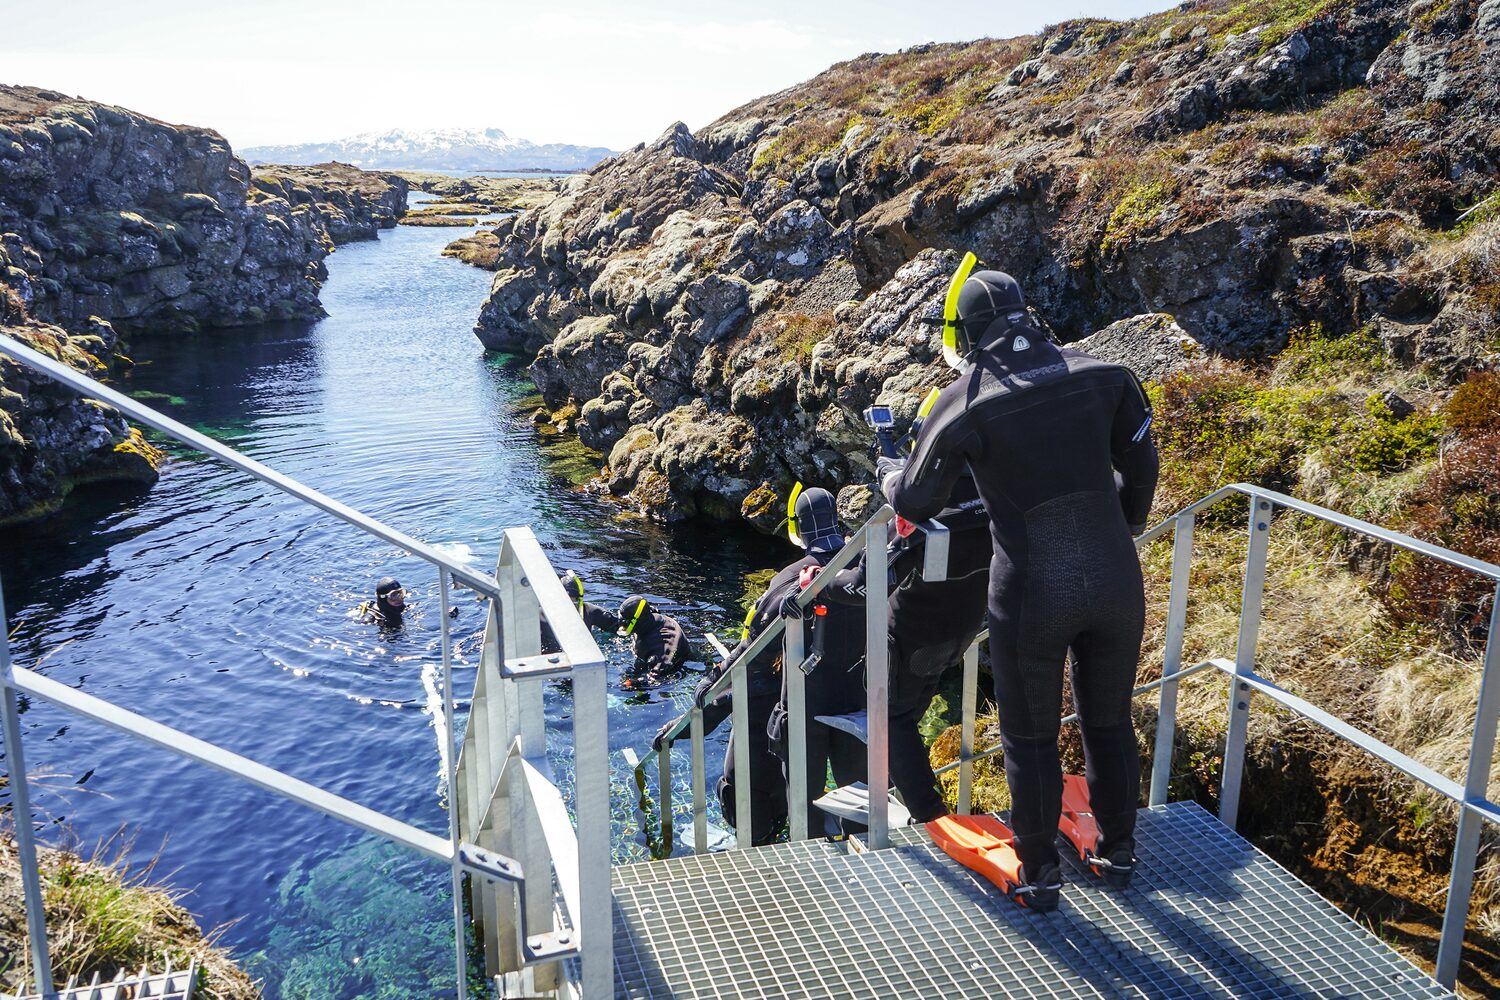 Group of people walking down stairs in Snorkeling gear into Silfra Rift waters 